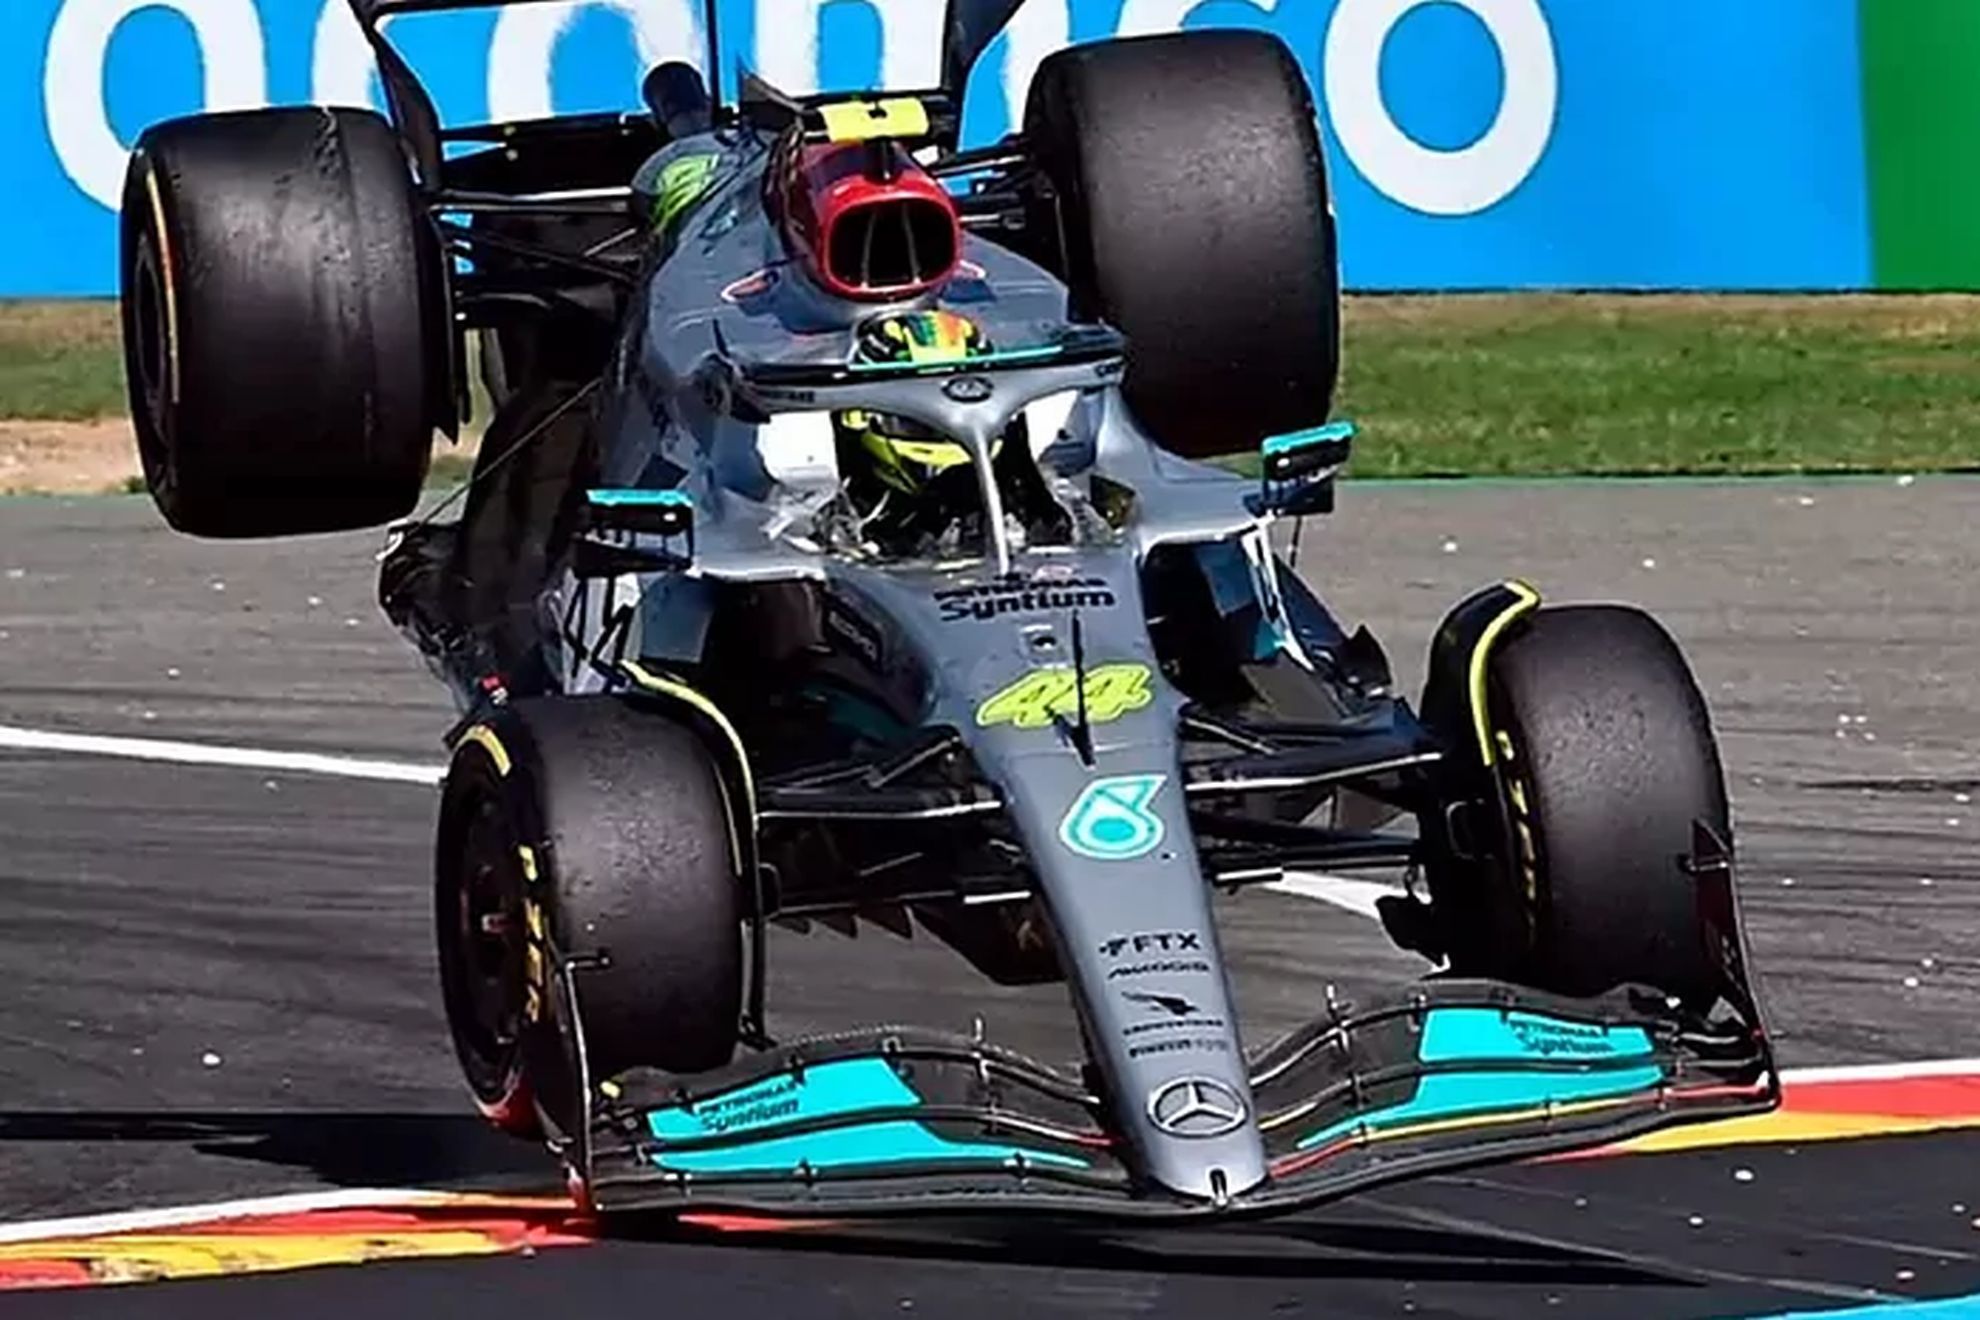 Lewis Hamilton after colliding with Fernando Alonso